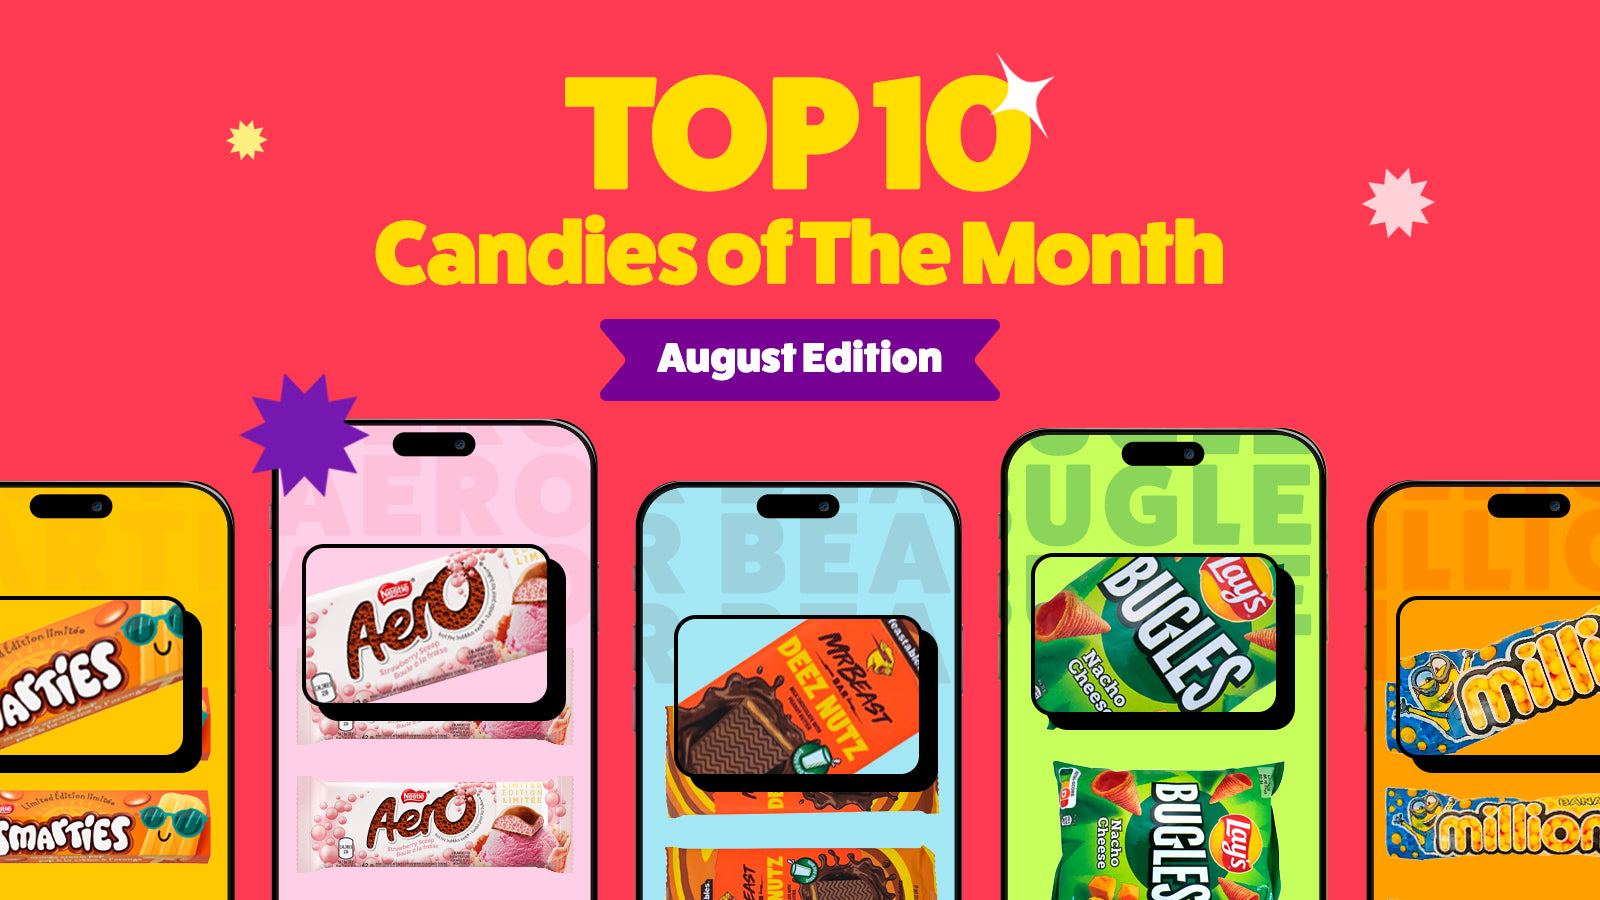 Top 10 Candies of the Month - August